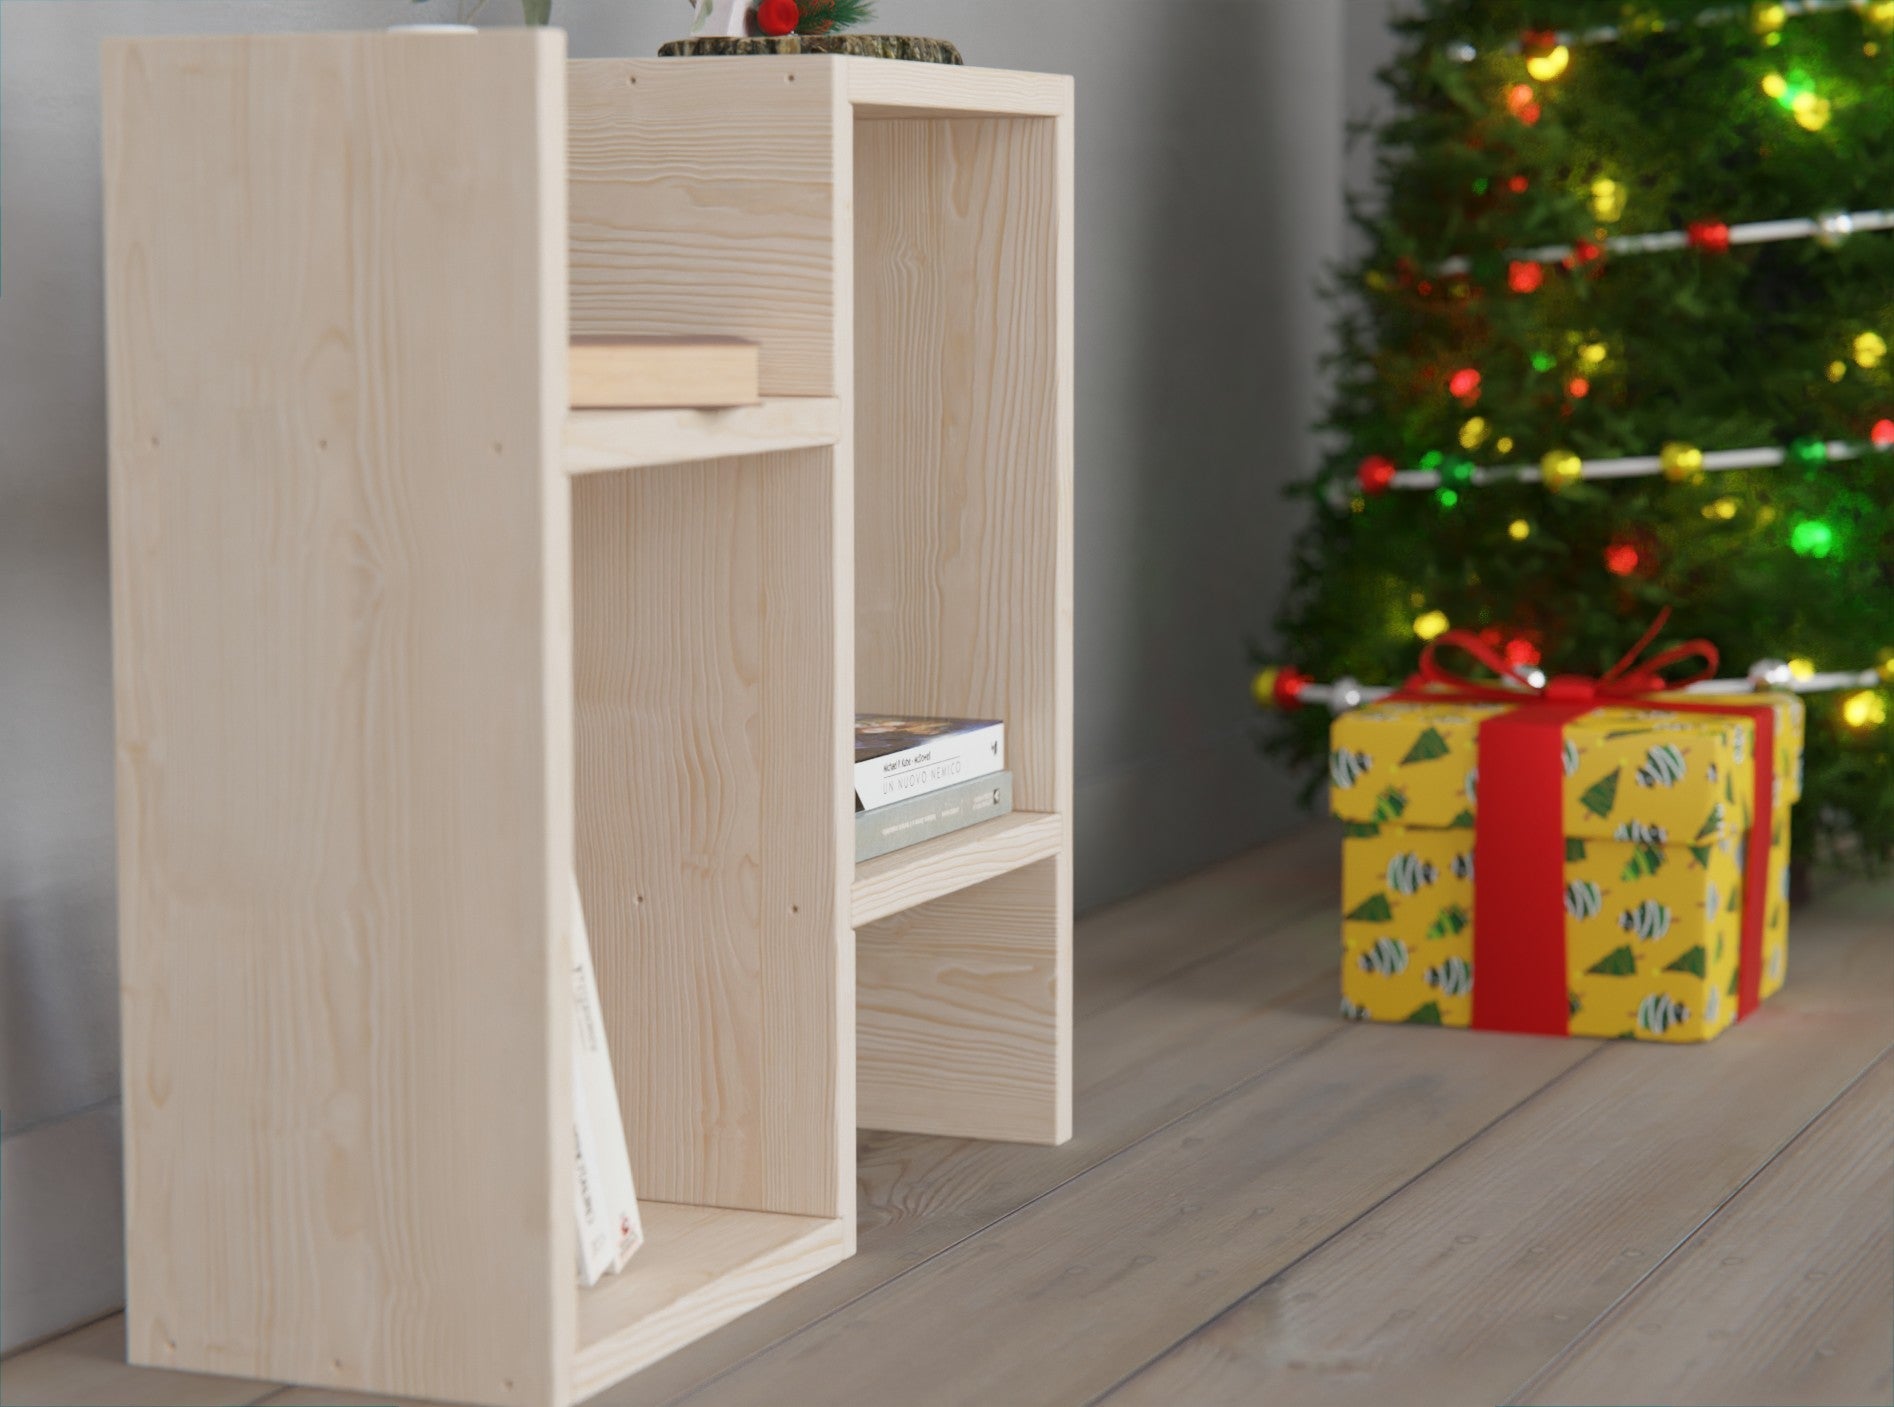 Our wooden flippable bookshelf: a stylish bedside table solution for your kid's bedroom.